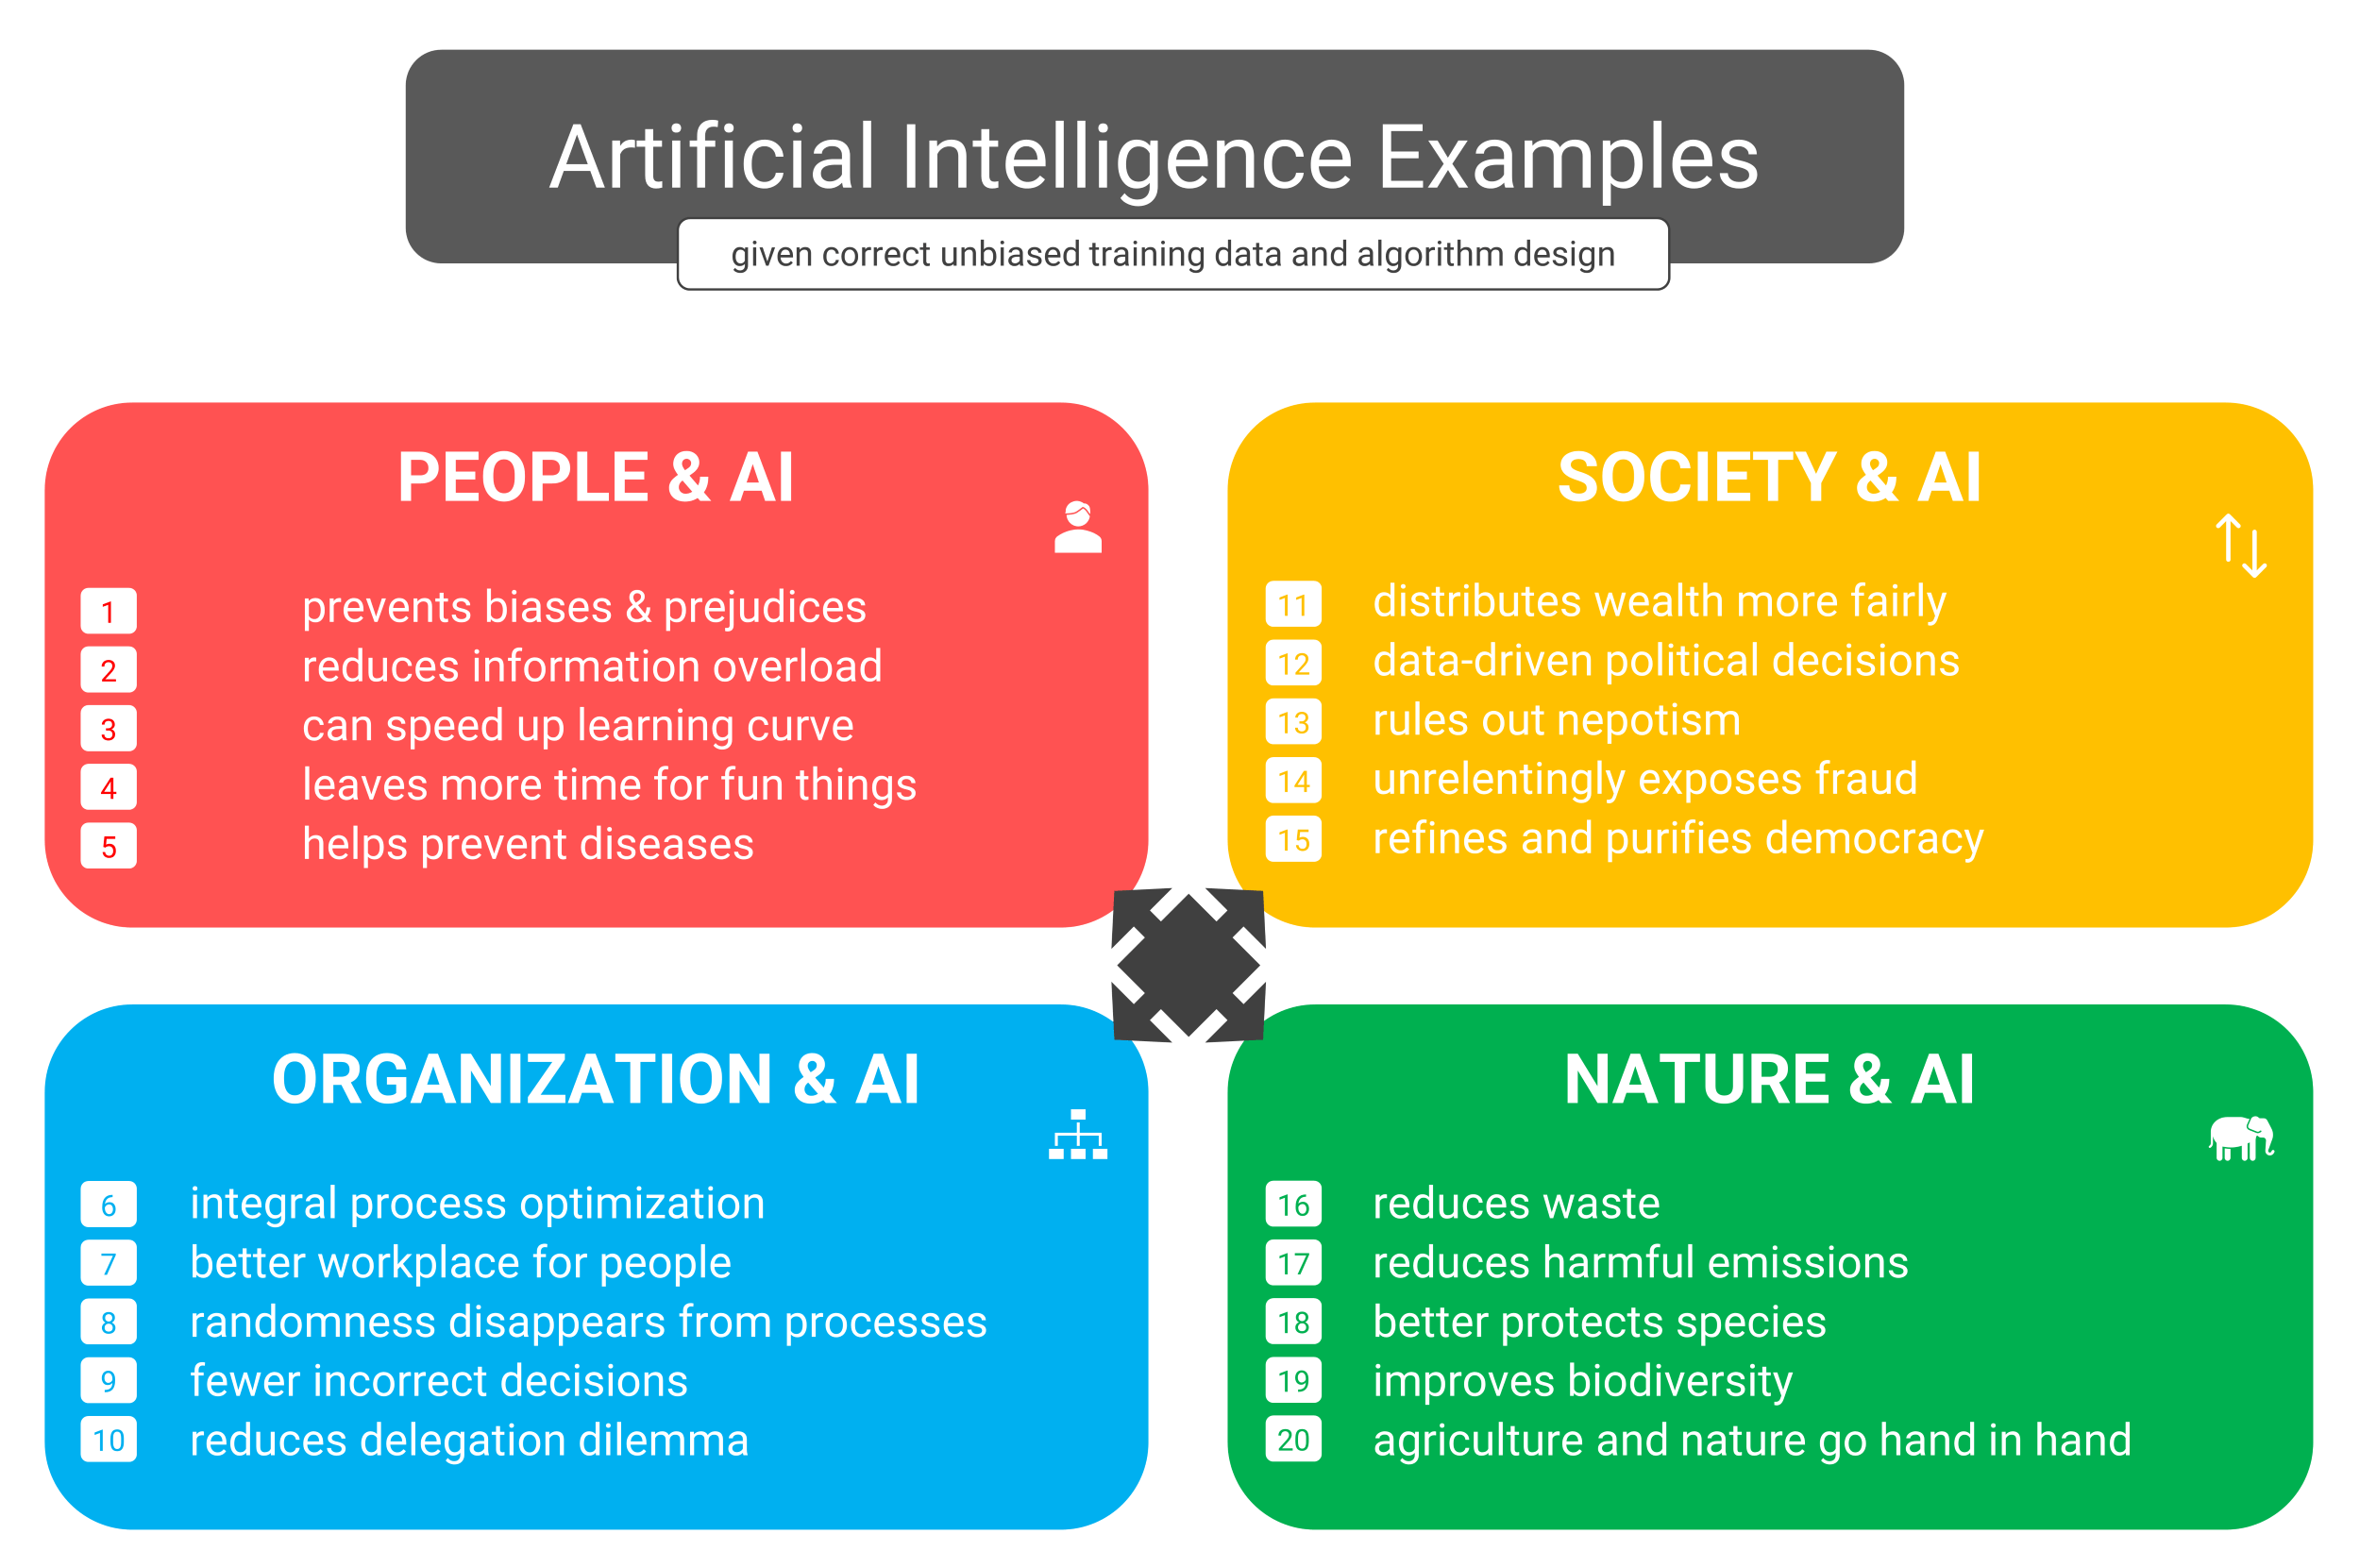 The benefits of artificial intelligence